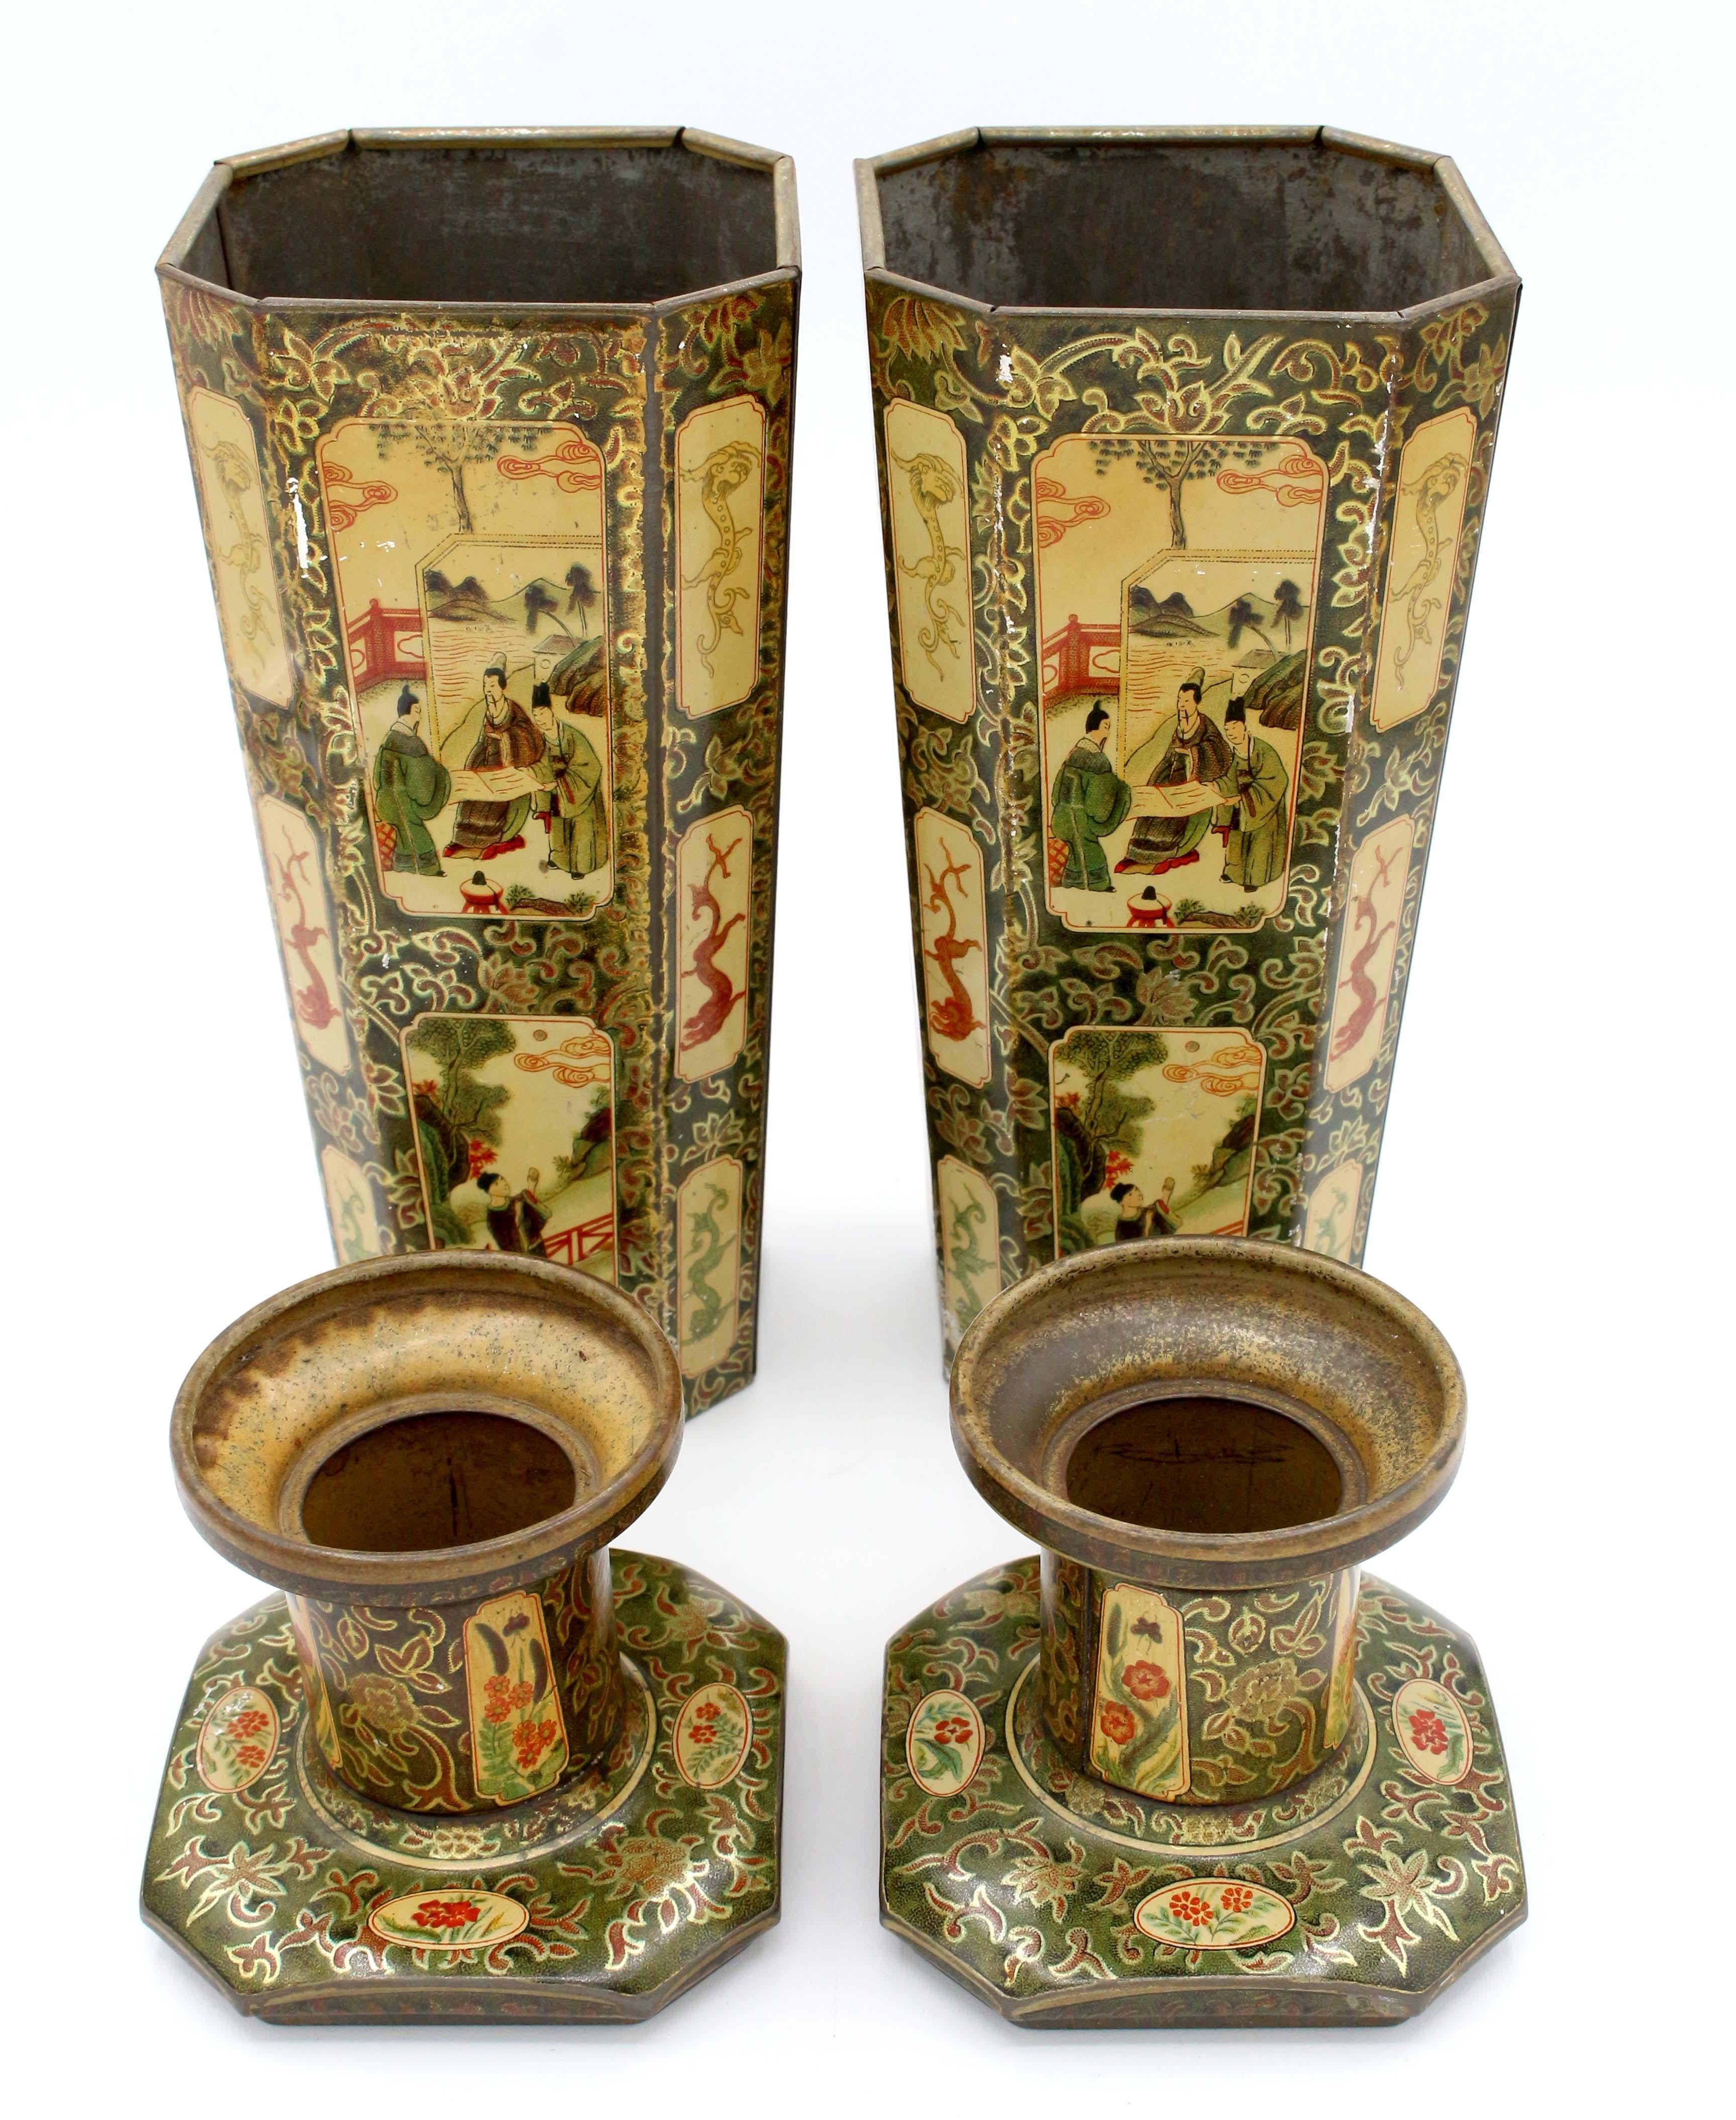 Pair of Vase Form Biscuit Tin Boxes by Huntley & Palmers, 1928, English In Good Condition For Sale In Chapel Hill, NC